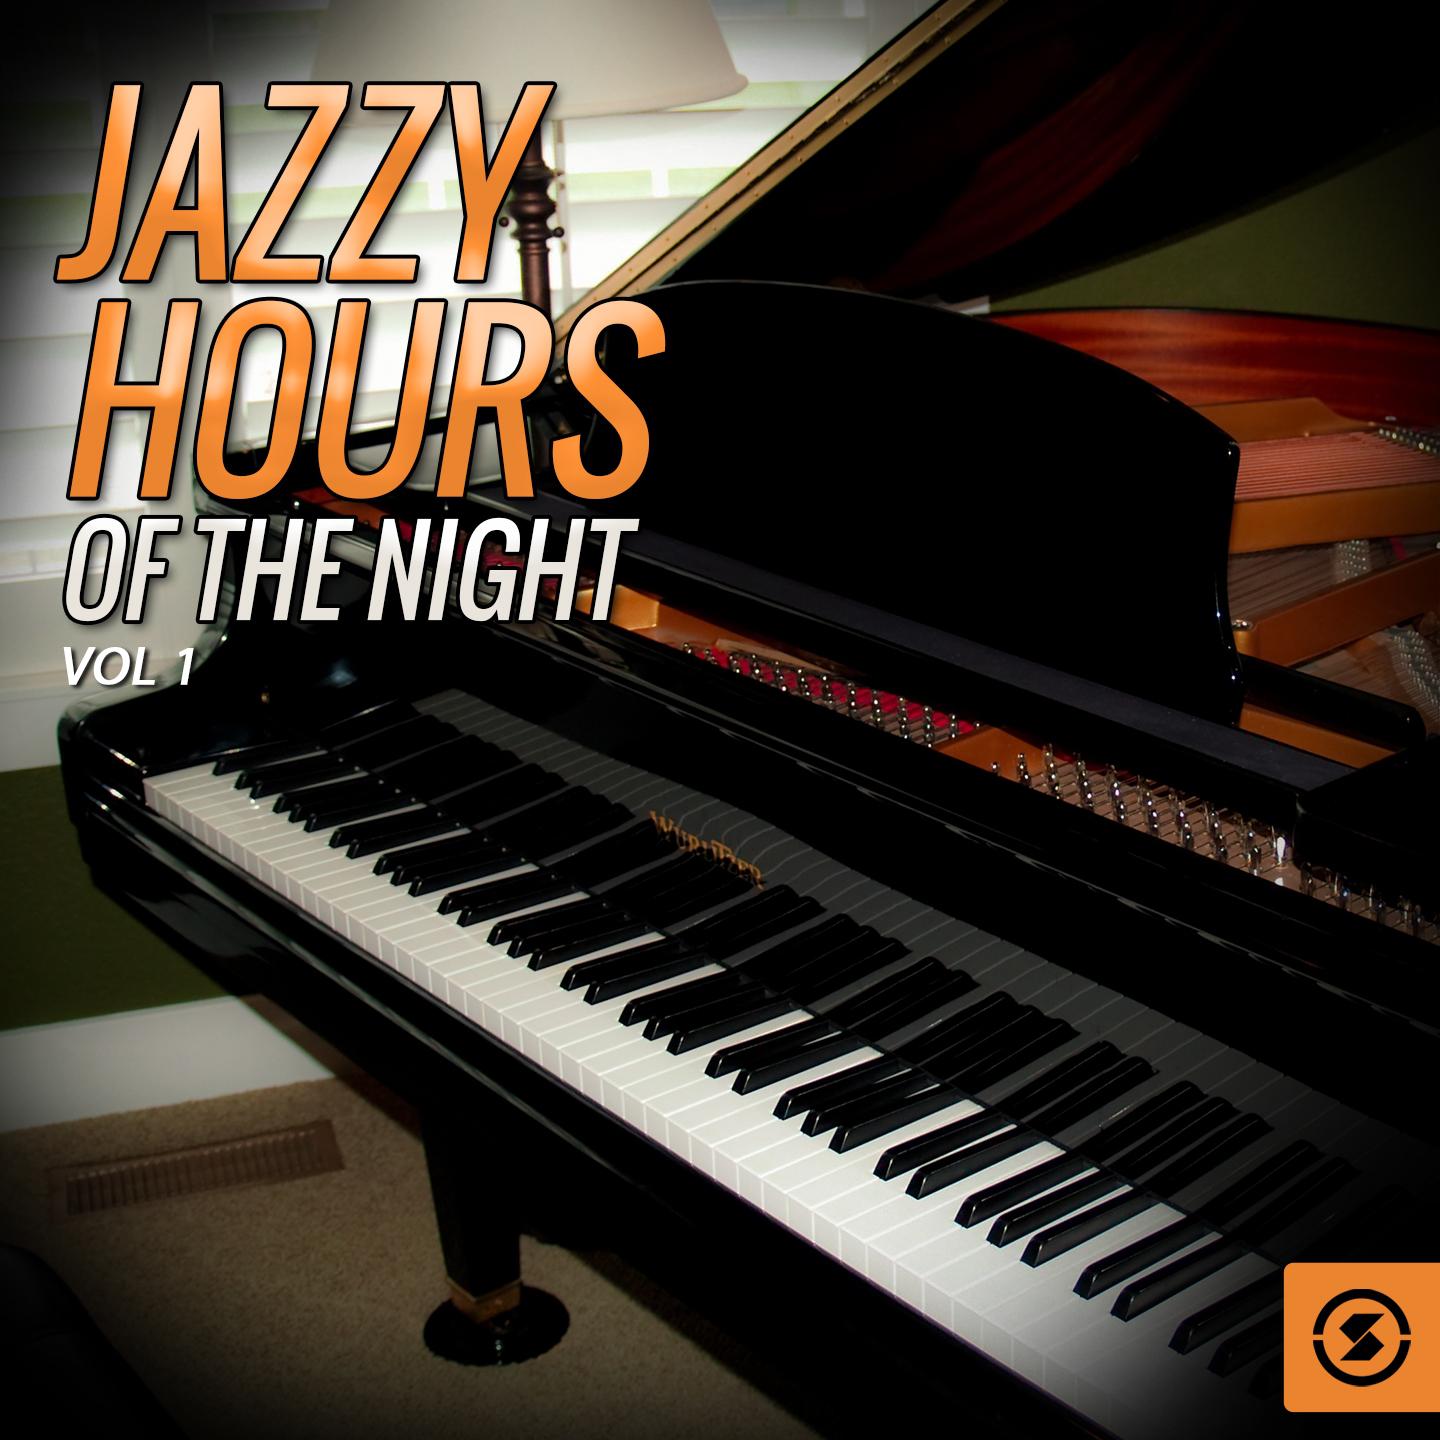 Jazzy Hours of the Night, Vol. 1